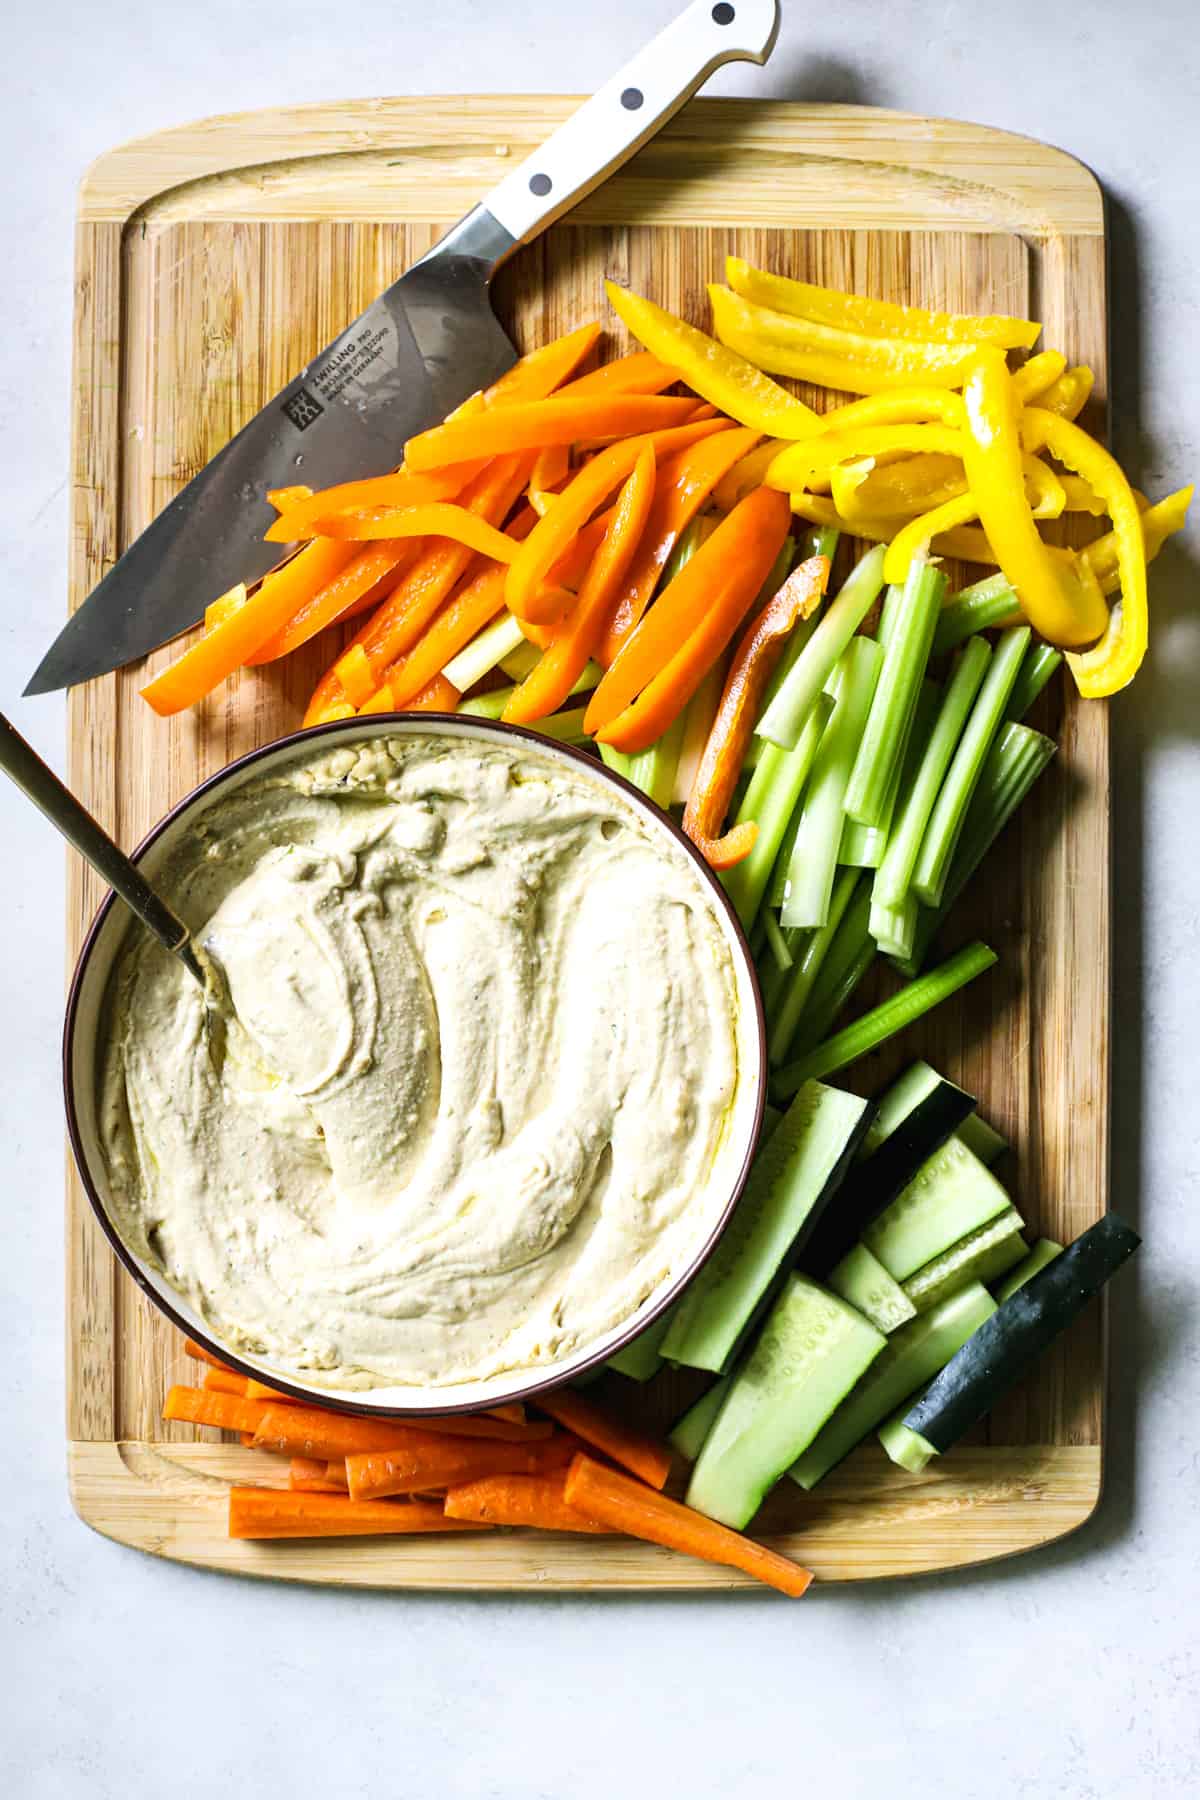 Carrots, cucumbers, celery, and bell peppers sliced on bamboo cutting board next to bowl with hummus and chef's knife